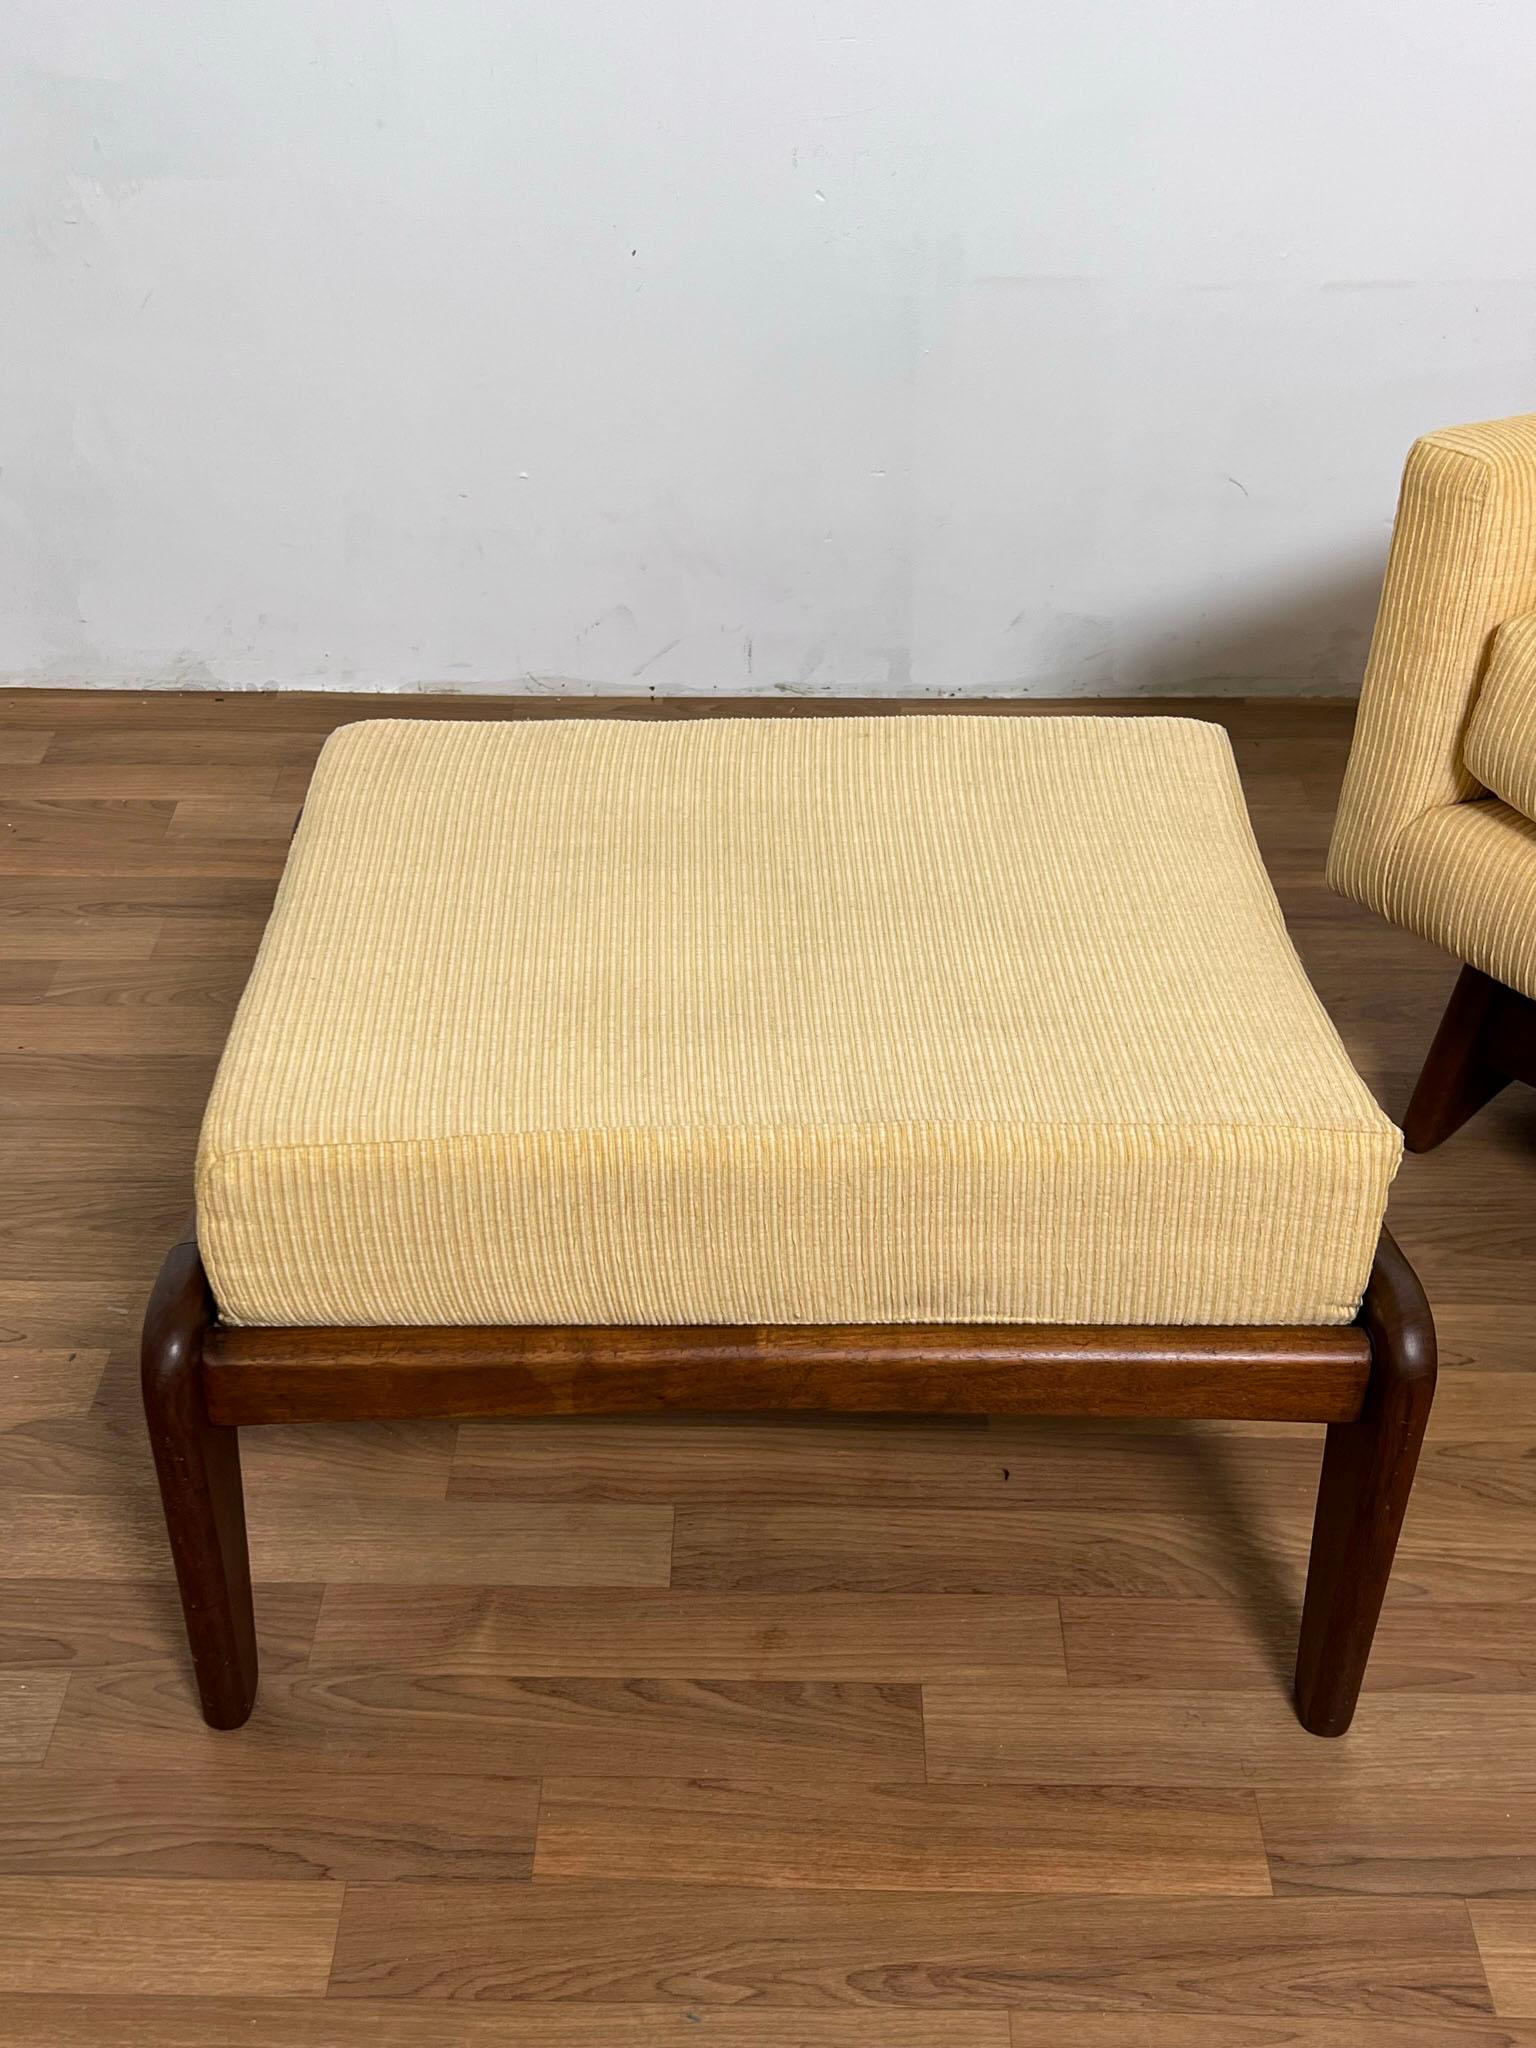 Adrian Pearsall for Craft Associates Lounge Chair and Ottoman, circa 1960s For Sale 6